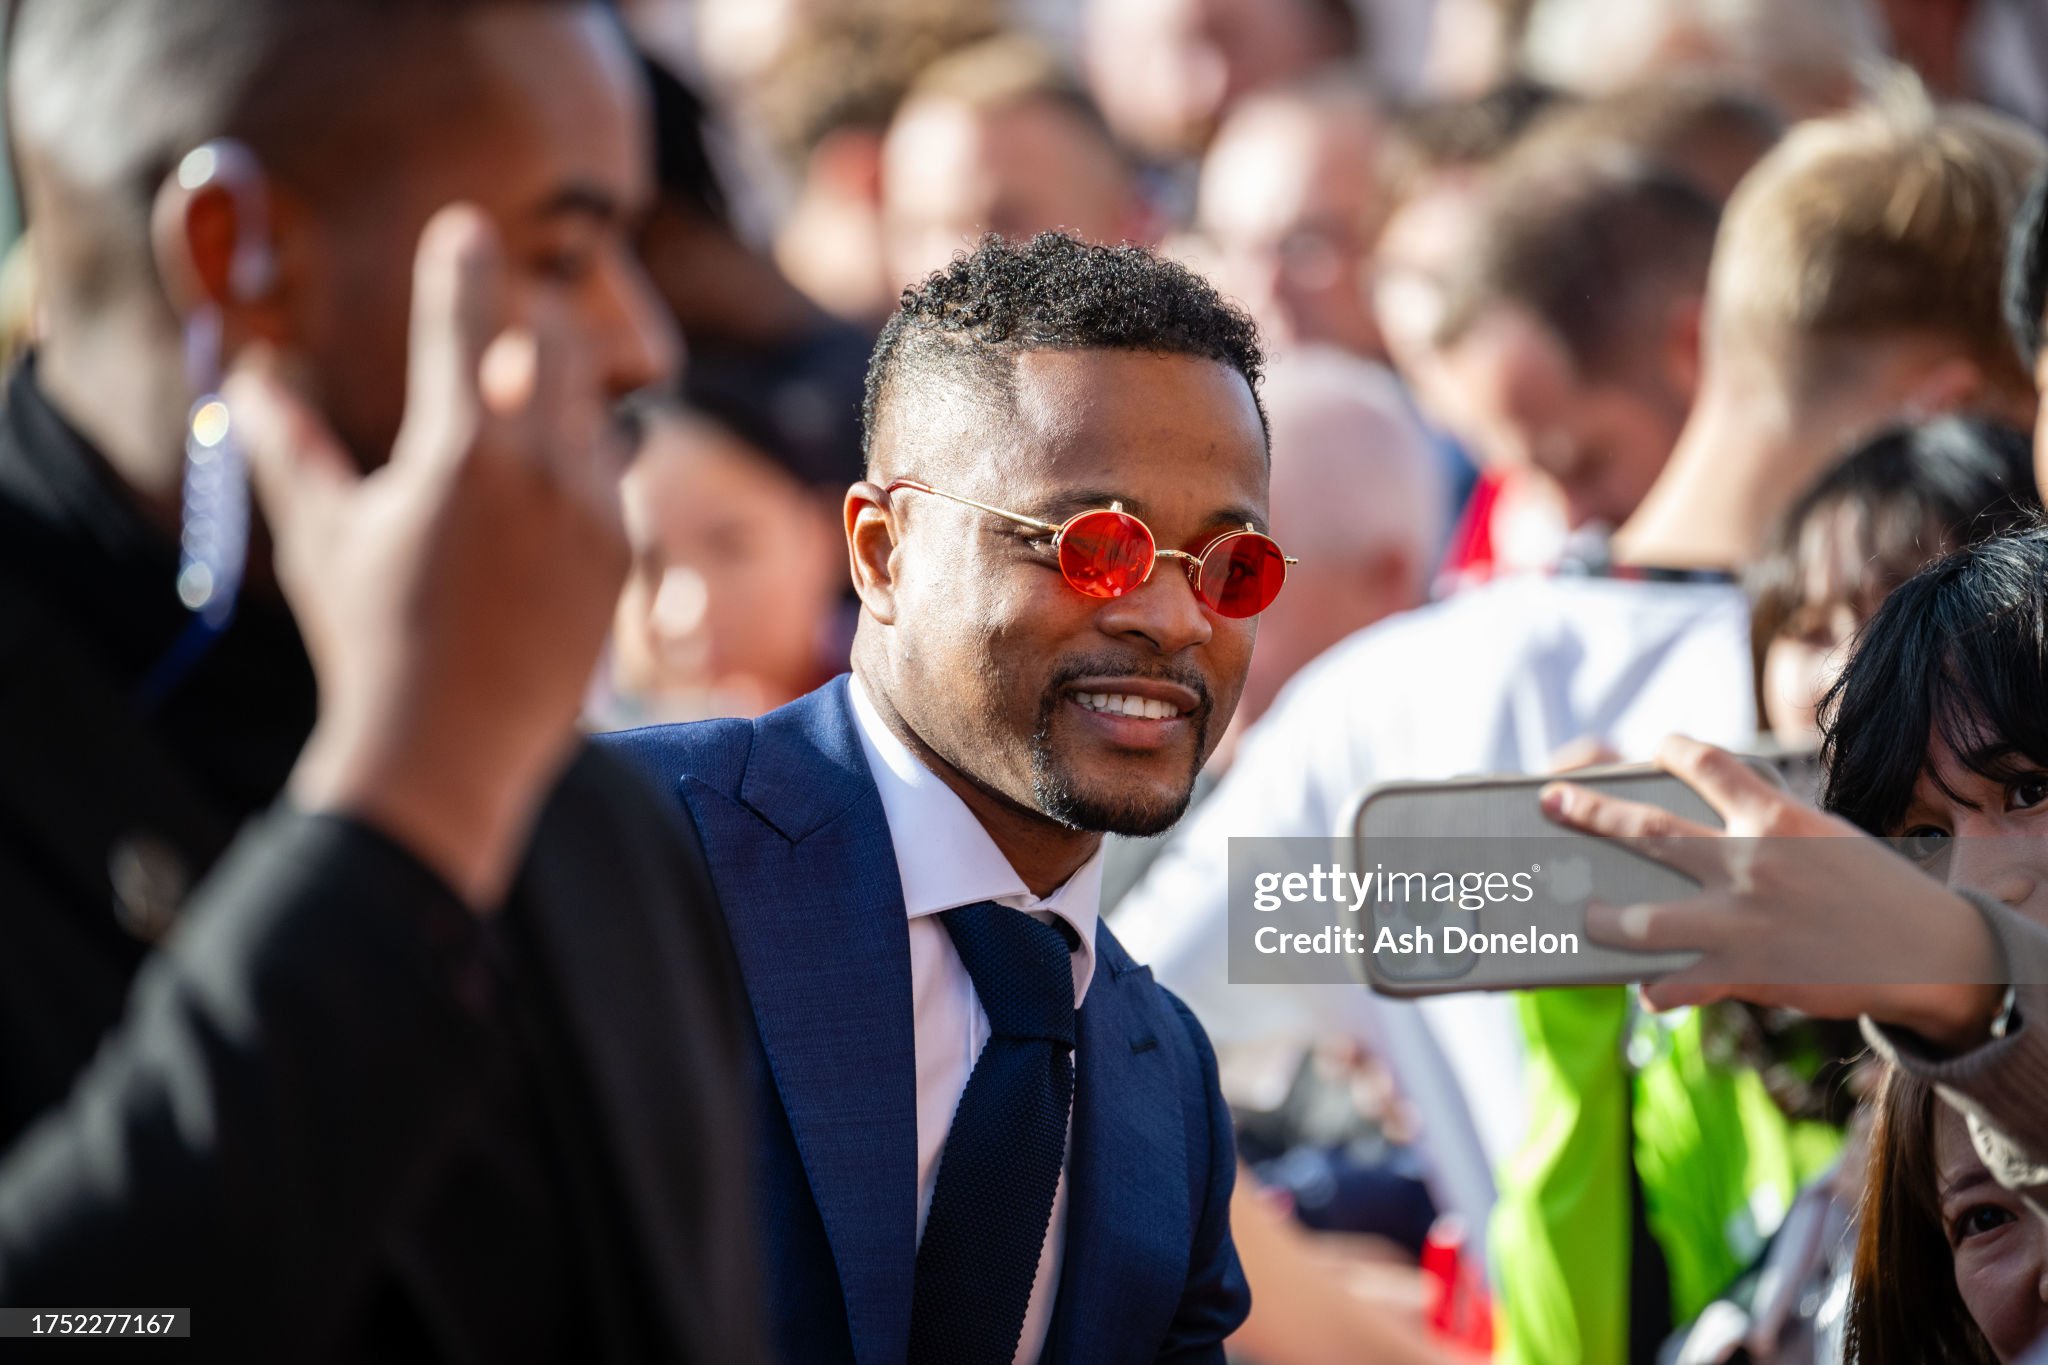 gettyimages-1752277167-2048x2048.jpg